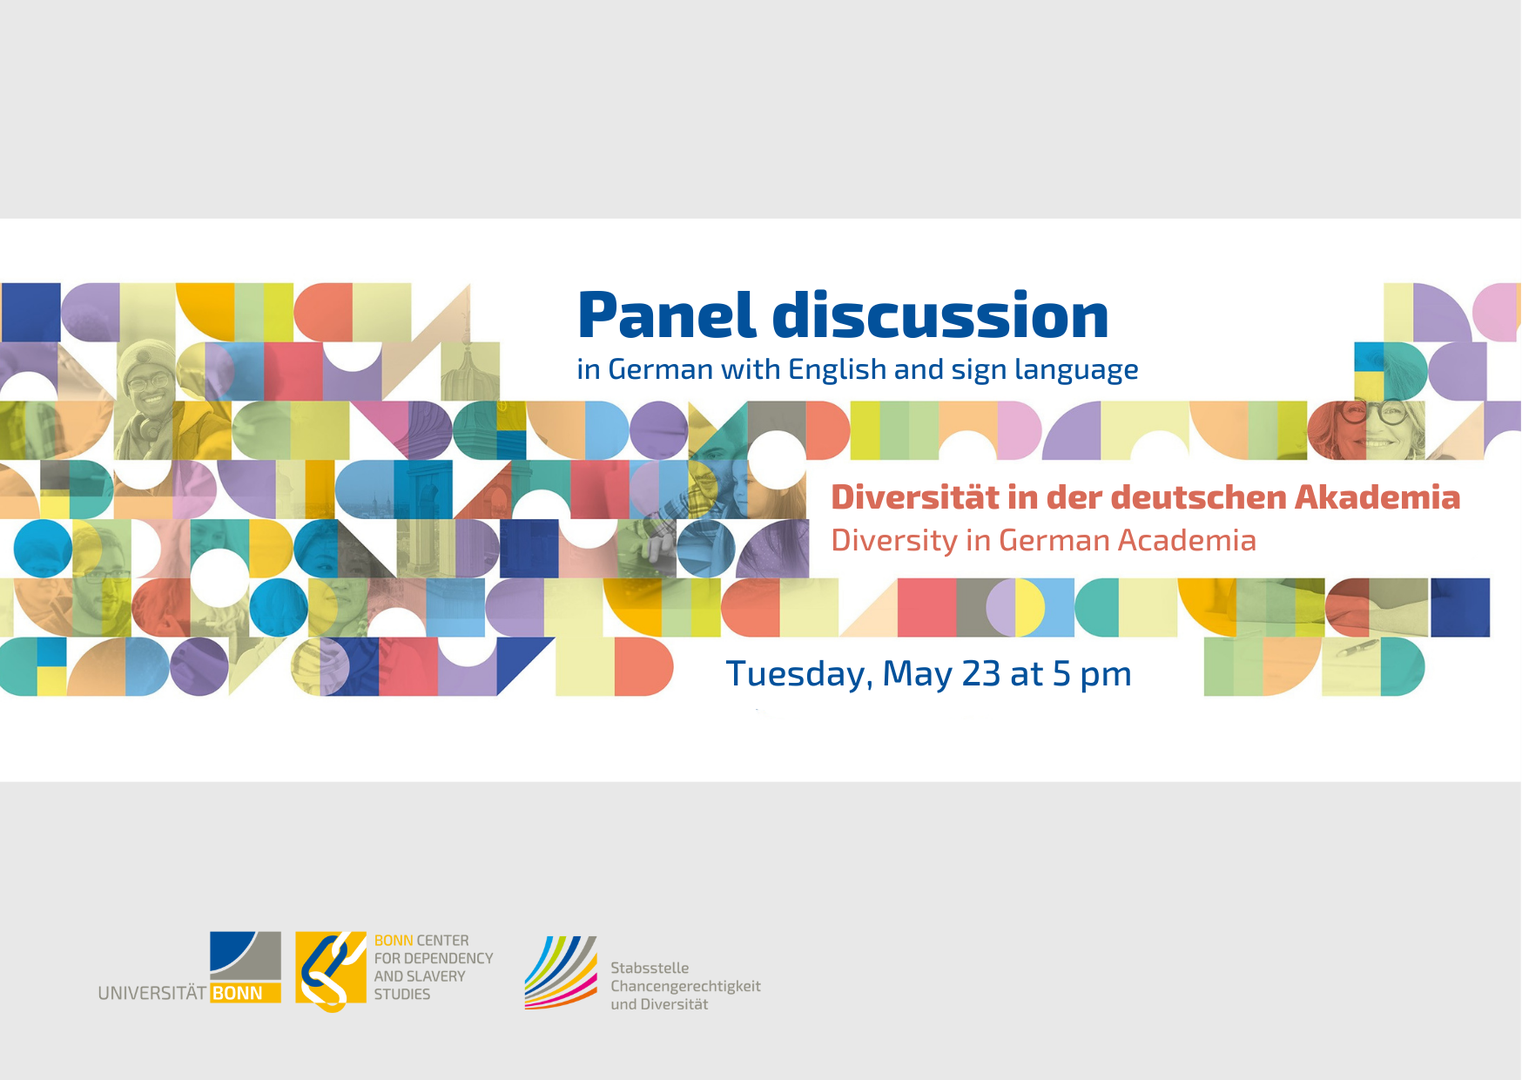 Panel discussion "Diversity in German Academia"